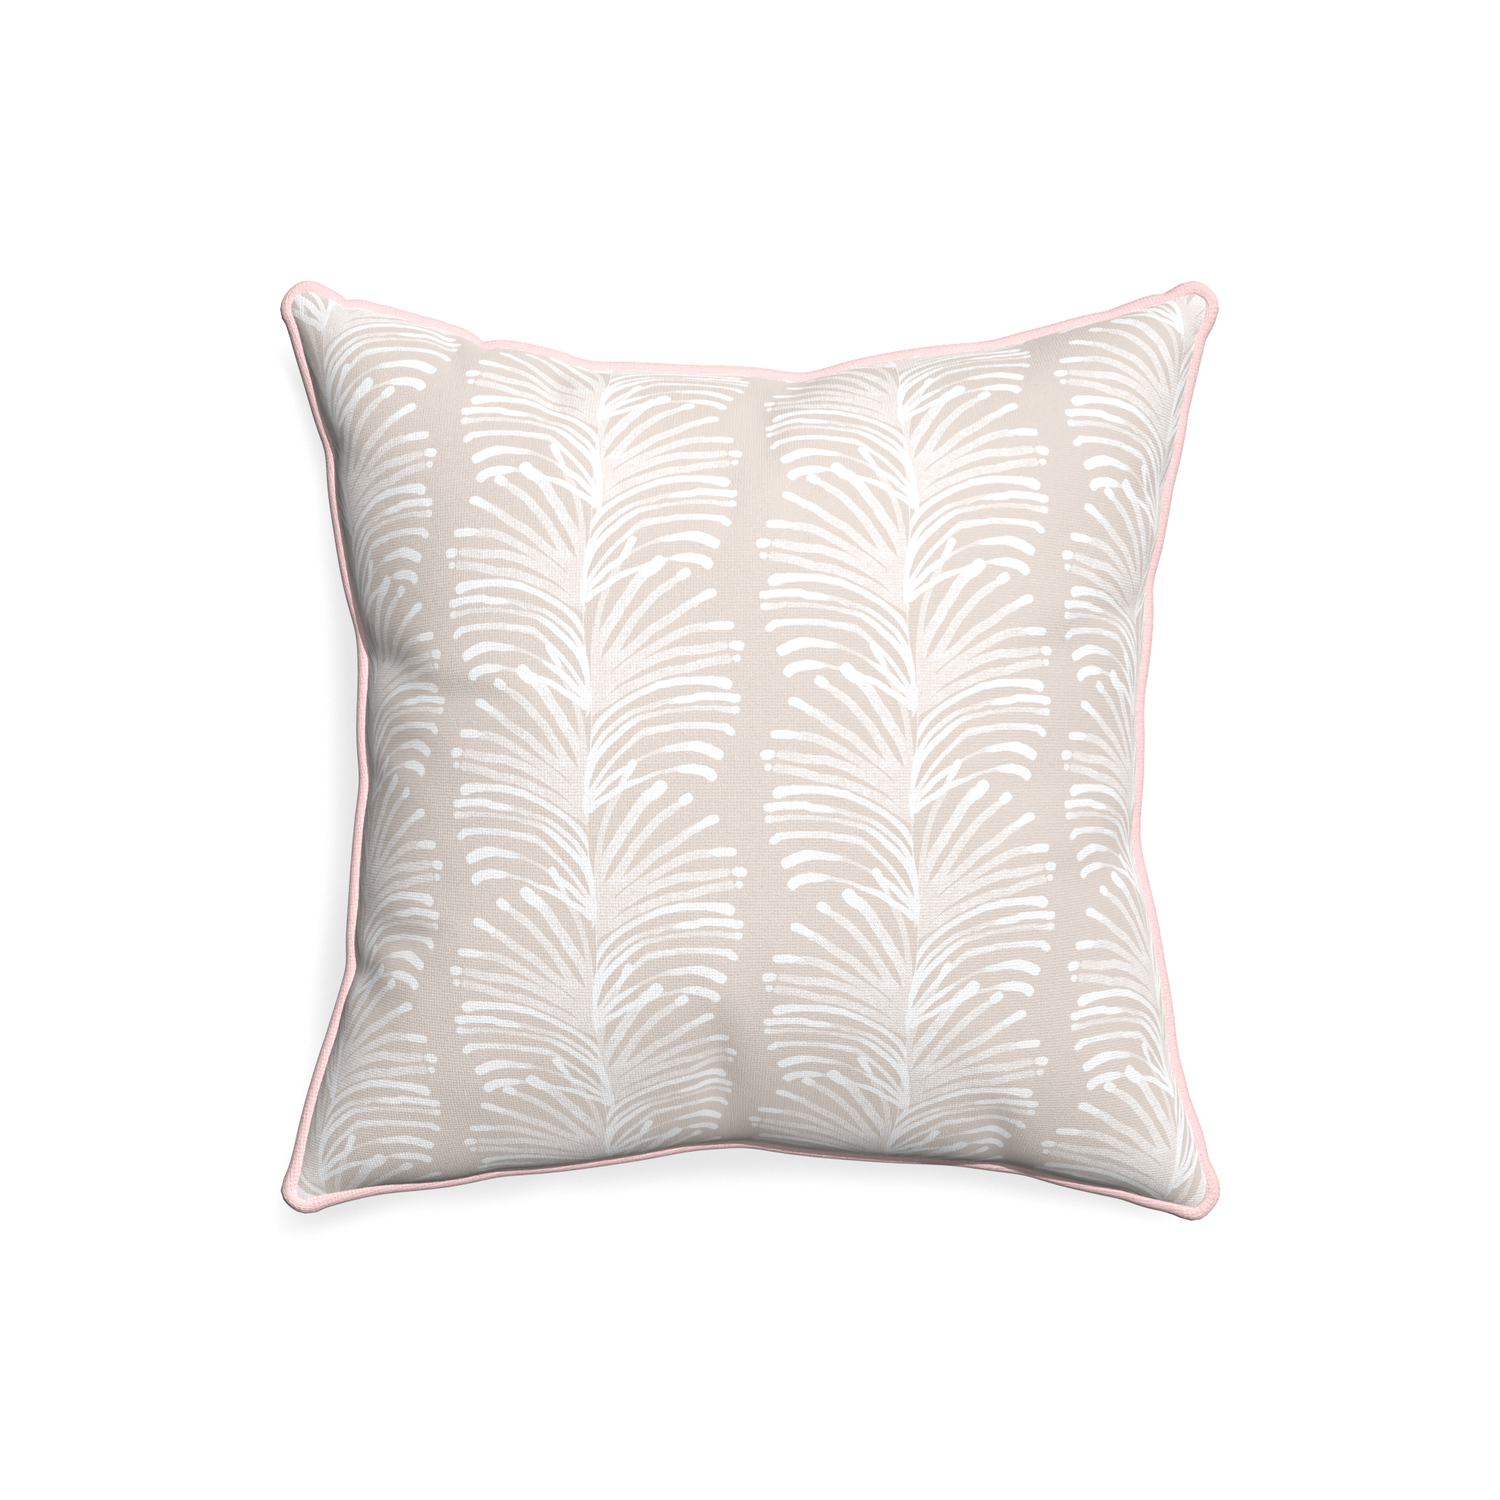 20-square emma sand custom sand colored botanical stripepillow with petal piping on white background